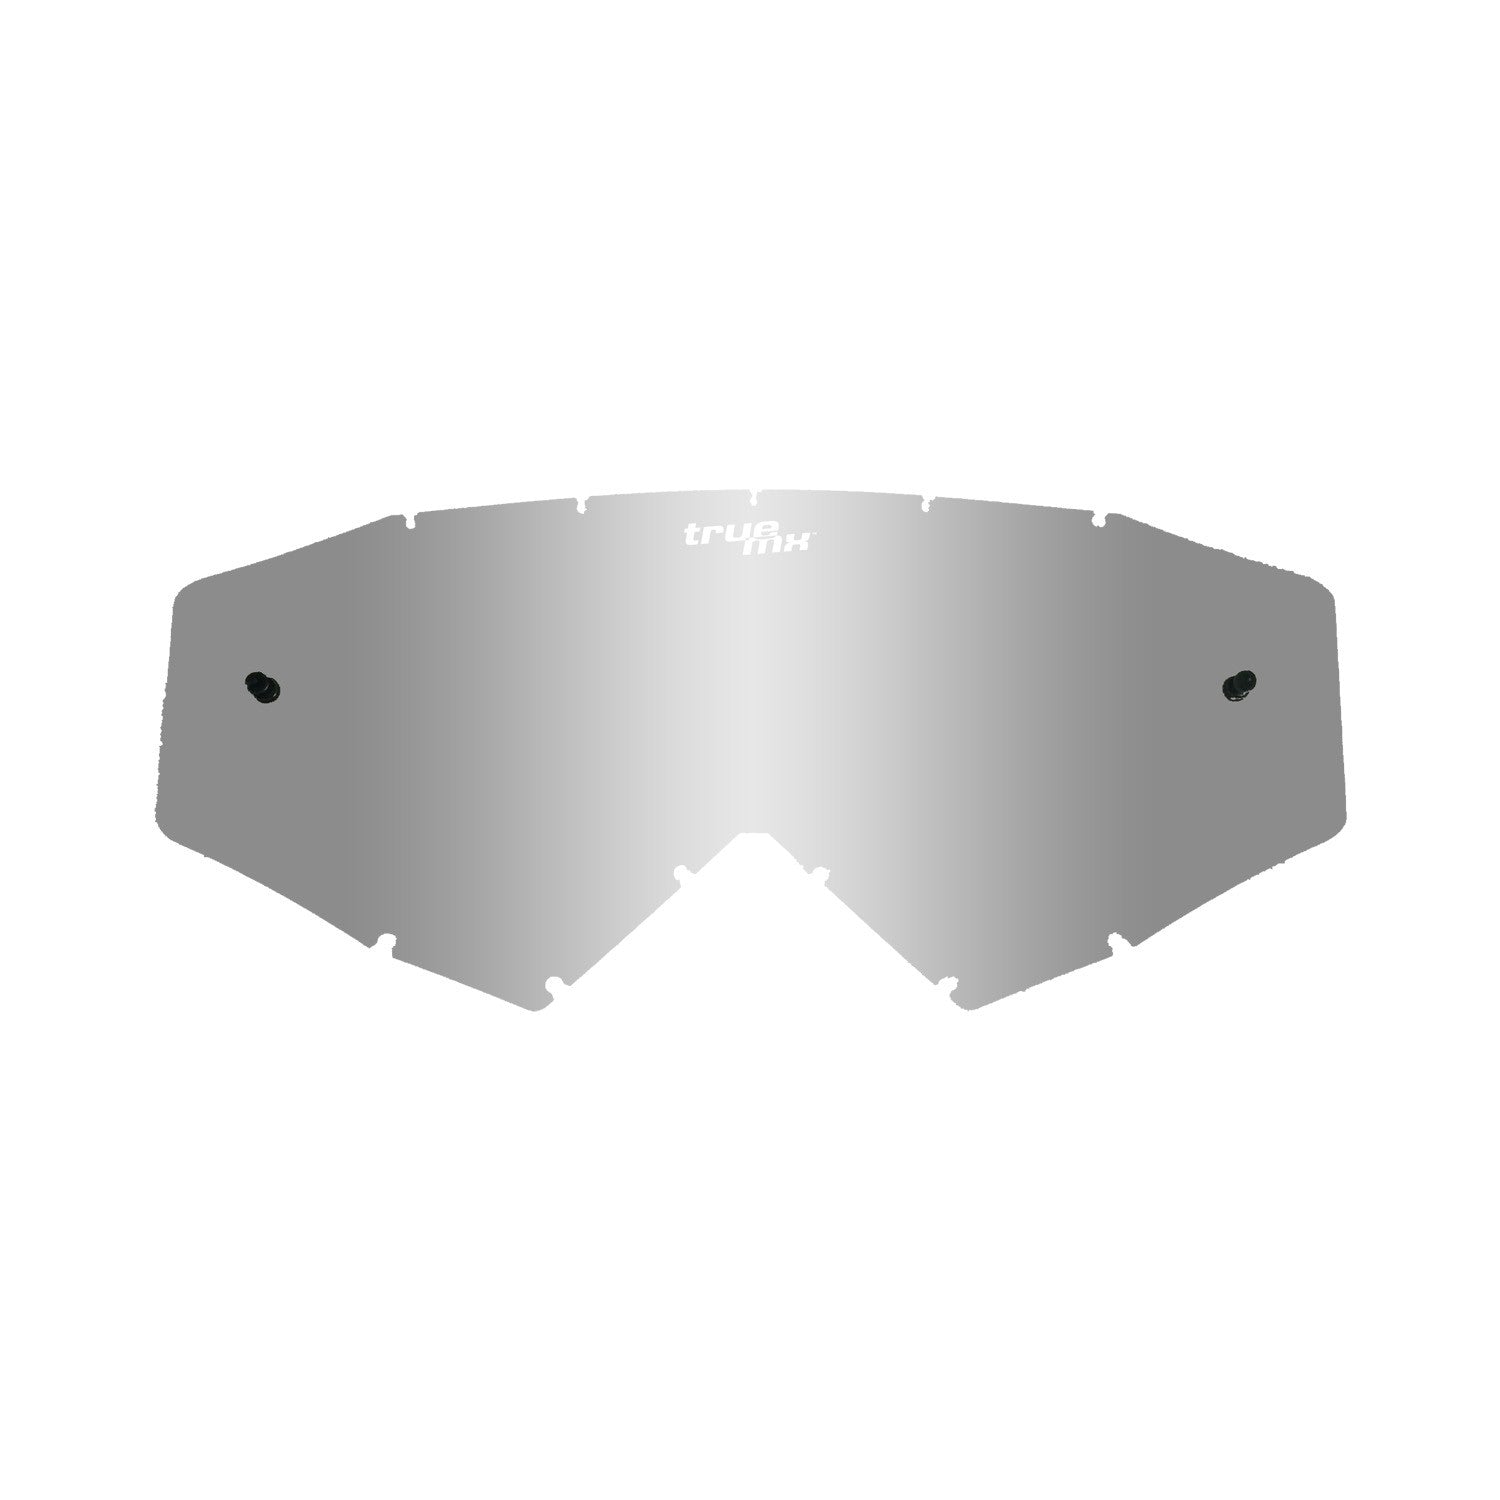 2018 TrueMX replacement lens silver